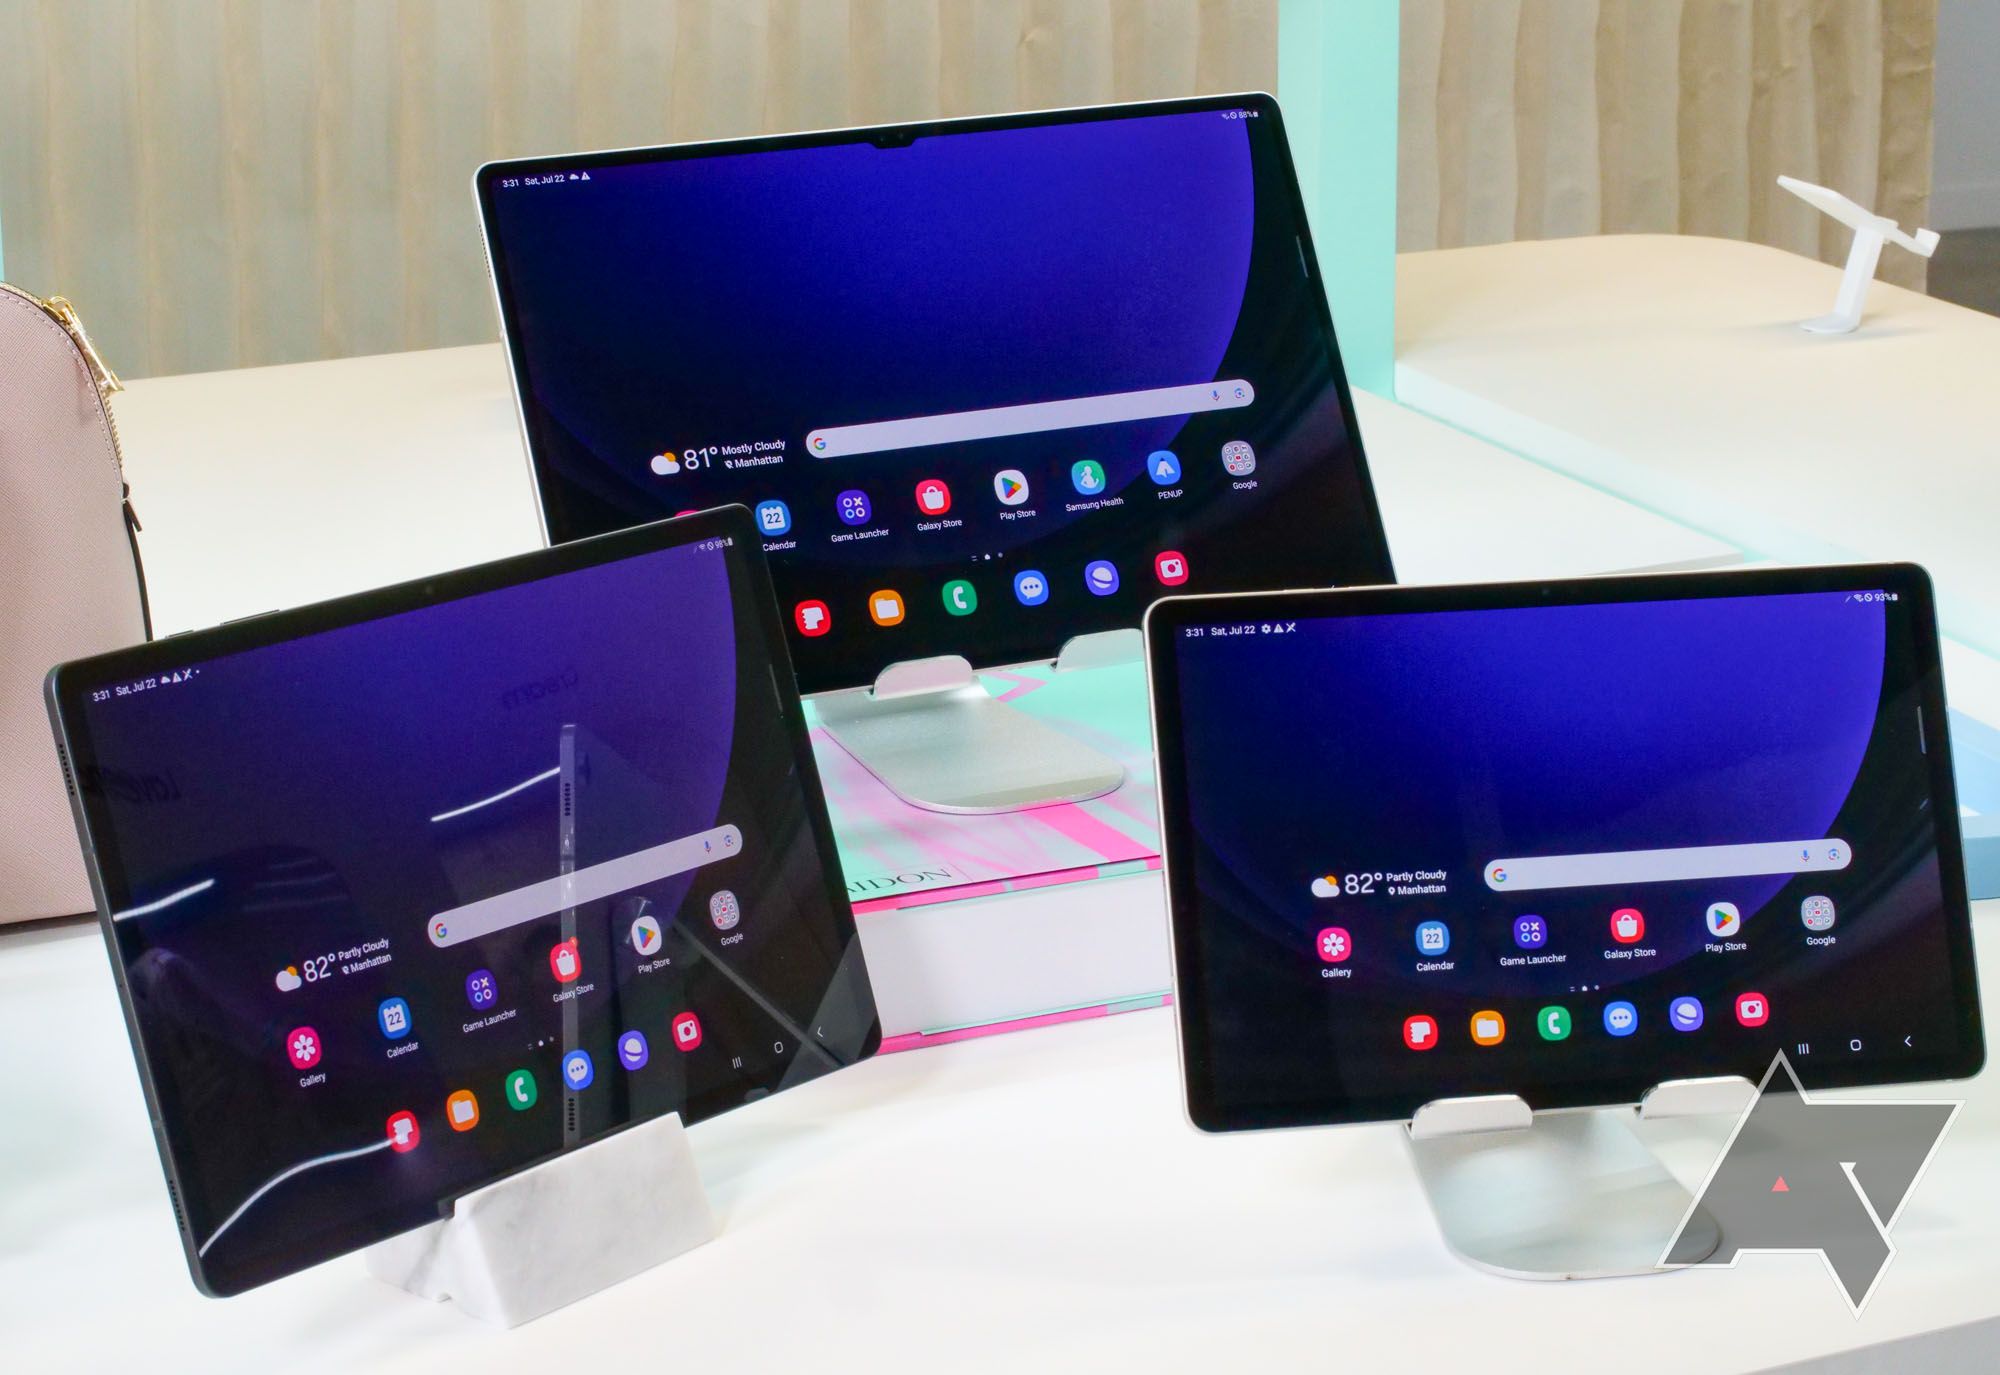 Samsung Galaxy Tab S9 Ultra hands-on: A premium tablet with water